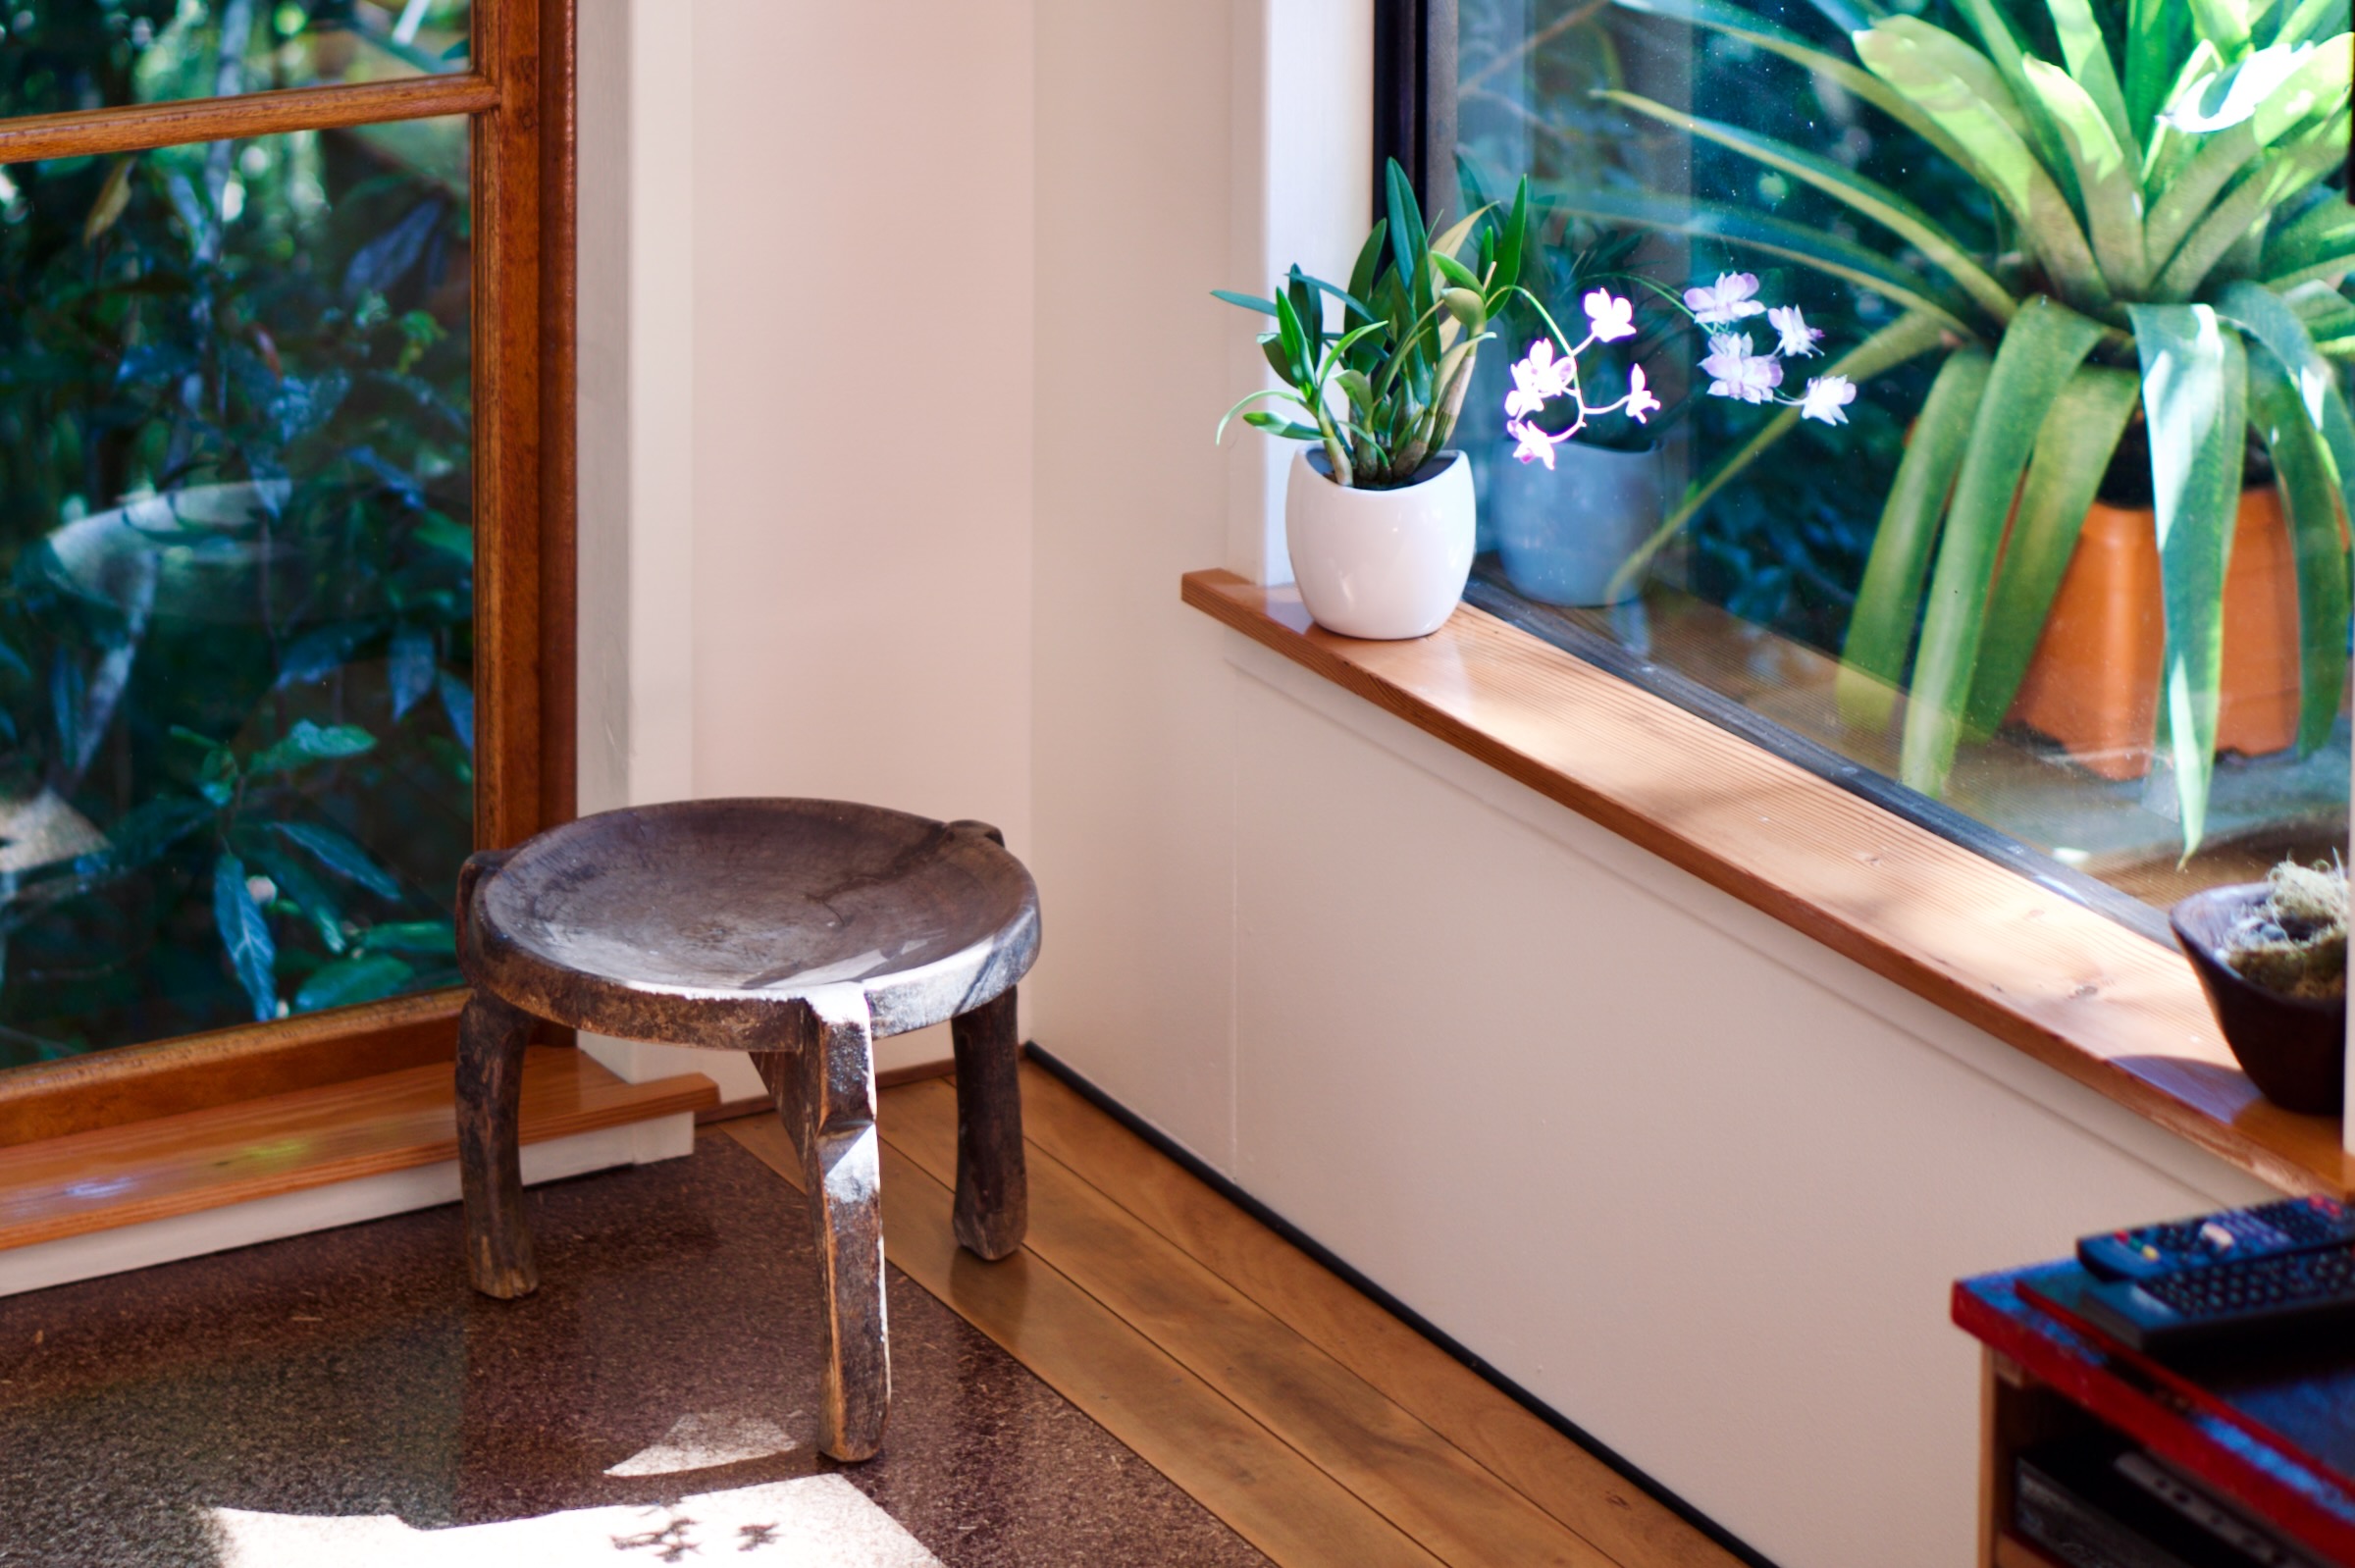 Photo of an interior of a room. A small, rustic wooden stool sits in the corner. Sunlight streams through timber windows, providing views to a leafy garden outside. A small green potted flowering plant sits on a widow ledge.